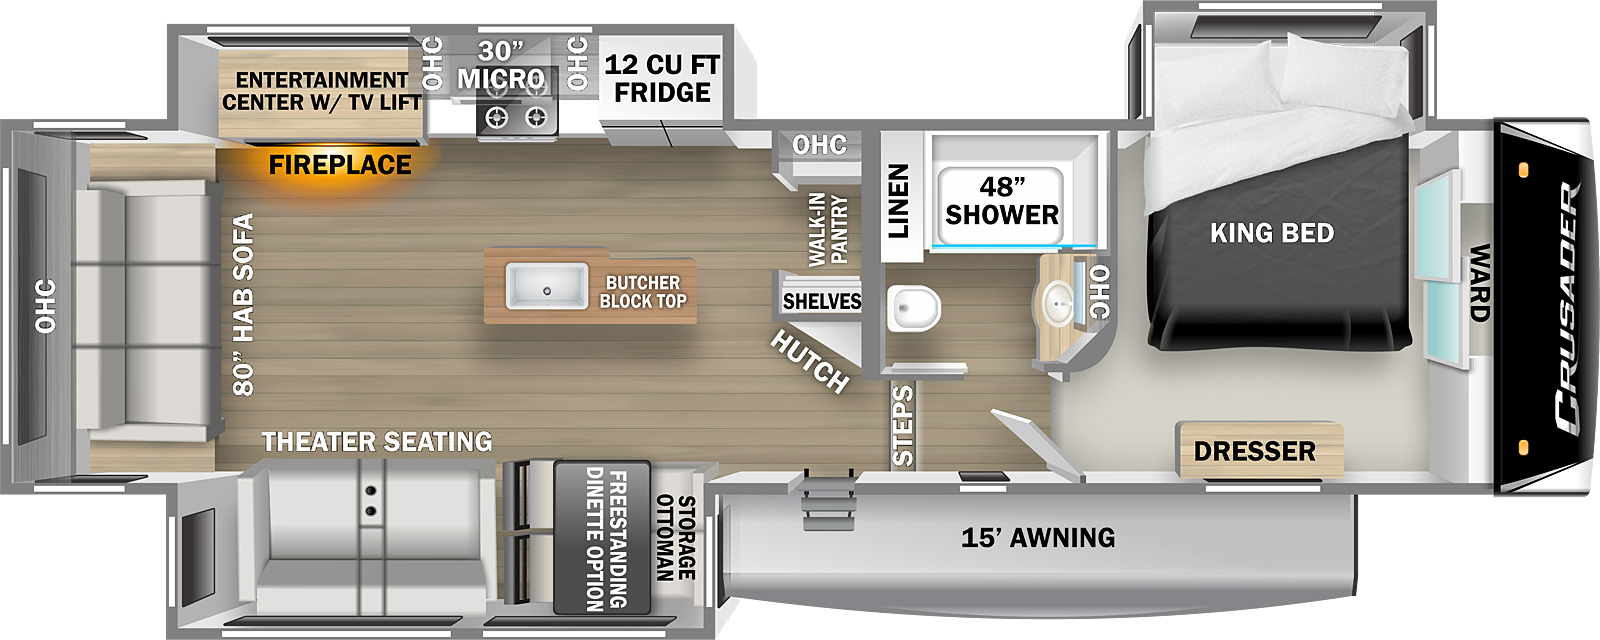 The Crusader 335RLP has a single entry door, 15' awning, and three slideouts, one on the door side and two on the off-door side. The front of the unit is a slideout bedroom with king bed, wardrobe, and dresser. The bedroom door leads to a hallway with two steps into the main living area. On the right side of the hallway is the bathroom with 48" shower, sink and medicine cabinet, linen closet, and commode. Standing at the base of the steps, there is a hutch to your right with shelves, a walk-in pantry, and overhead cabinets. There is a kitchen island with butcher block countertop and sink near the middle of the room. On the right is a slideout containing the kitchen and entertainment center with fireplace. The kitchen contains a 12 cubic foot refrigerator, stovetop with oven, 30" overhead microwave, and overhead cabinets. The entertainment center/fireplace faces the opposite wall. An 80" hide-a-bed sofa with overhead cabinets mounted above. The left wall of the unit is another slide room containing theater seating, a booth dinette with the option for a free-standing dinette, and storage ottoman.